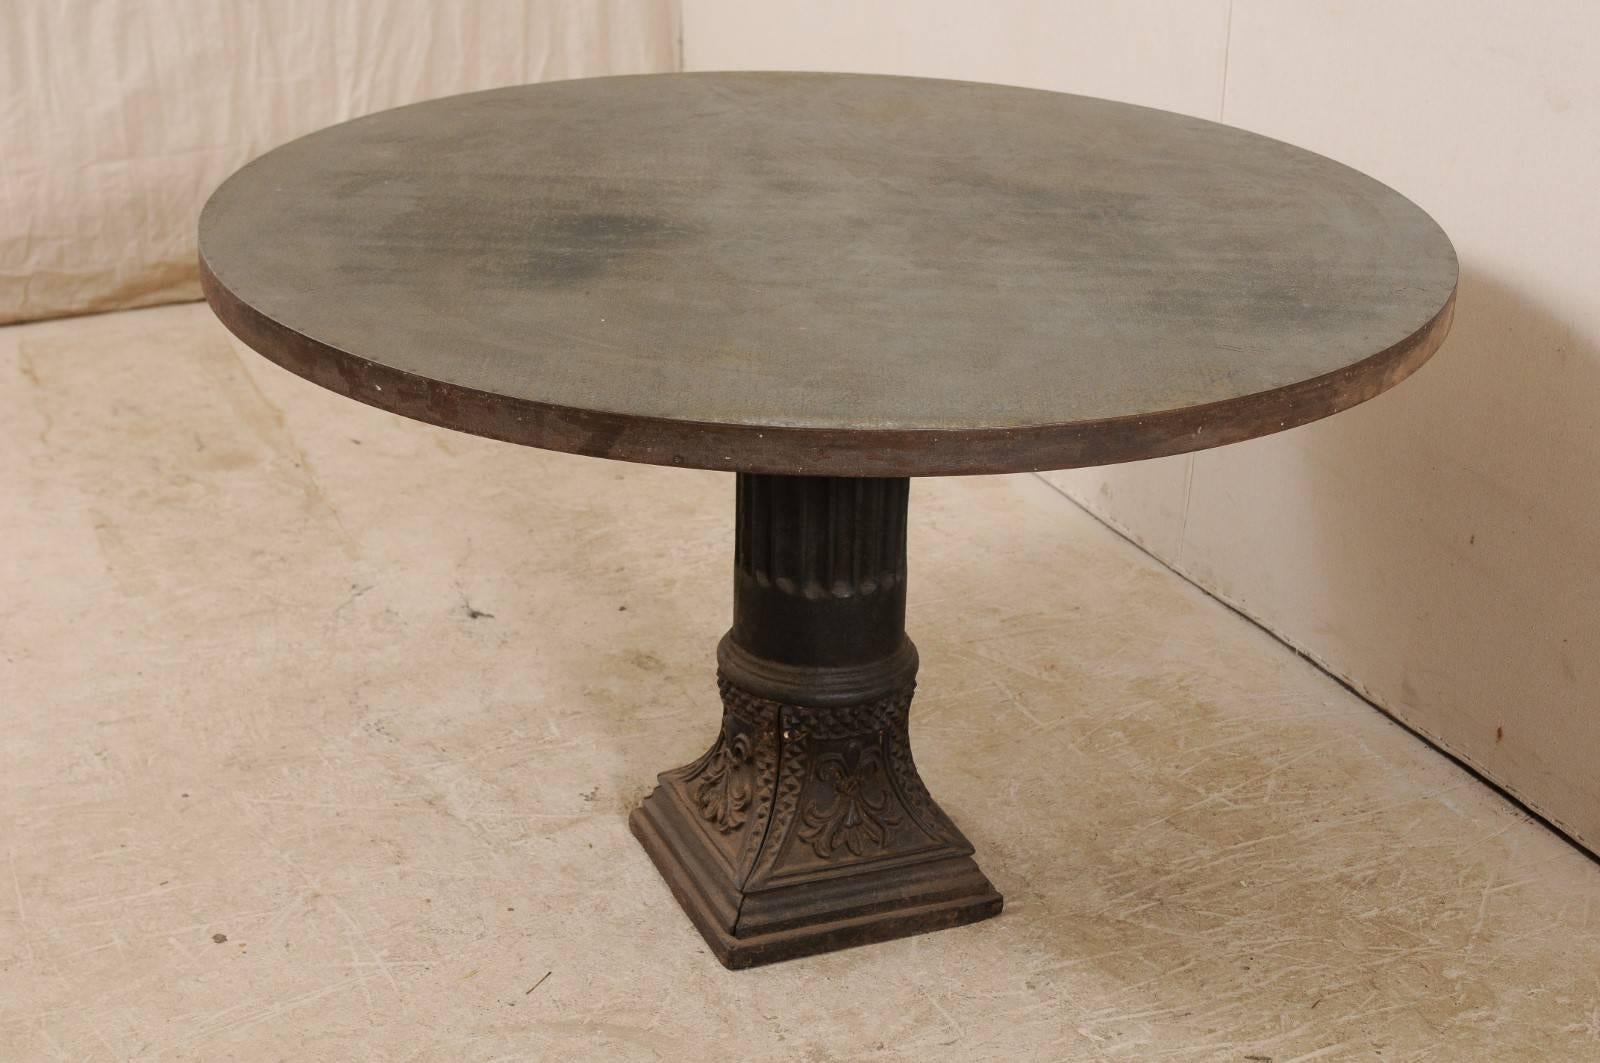 American 4 Ft. Diameter Custom Centre Table w/Antique Column Base & Patinated-Steel Top For Sale